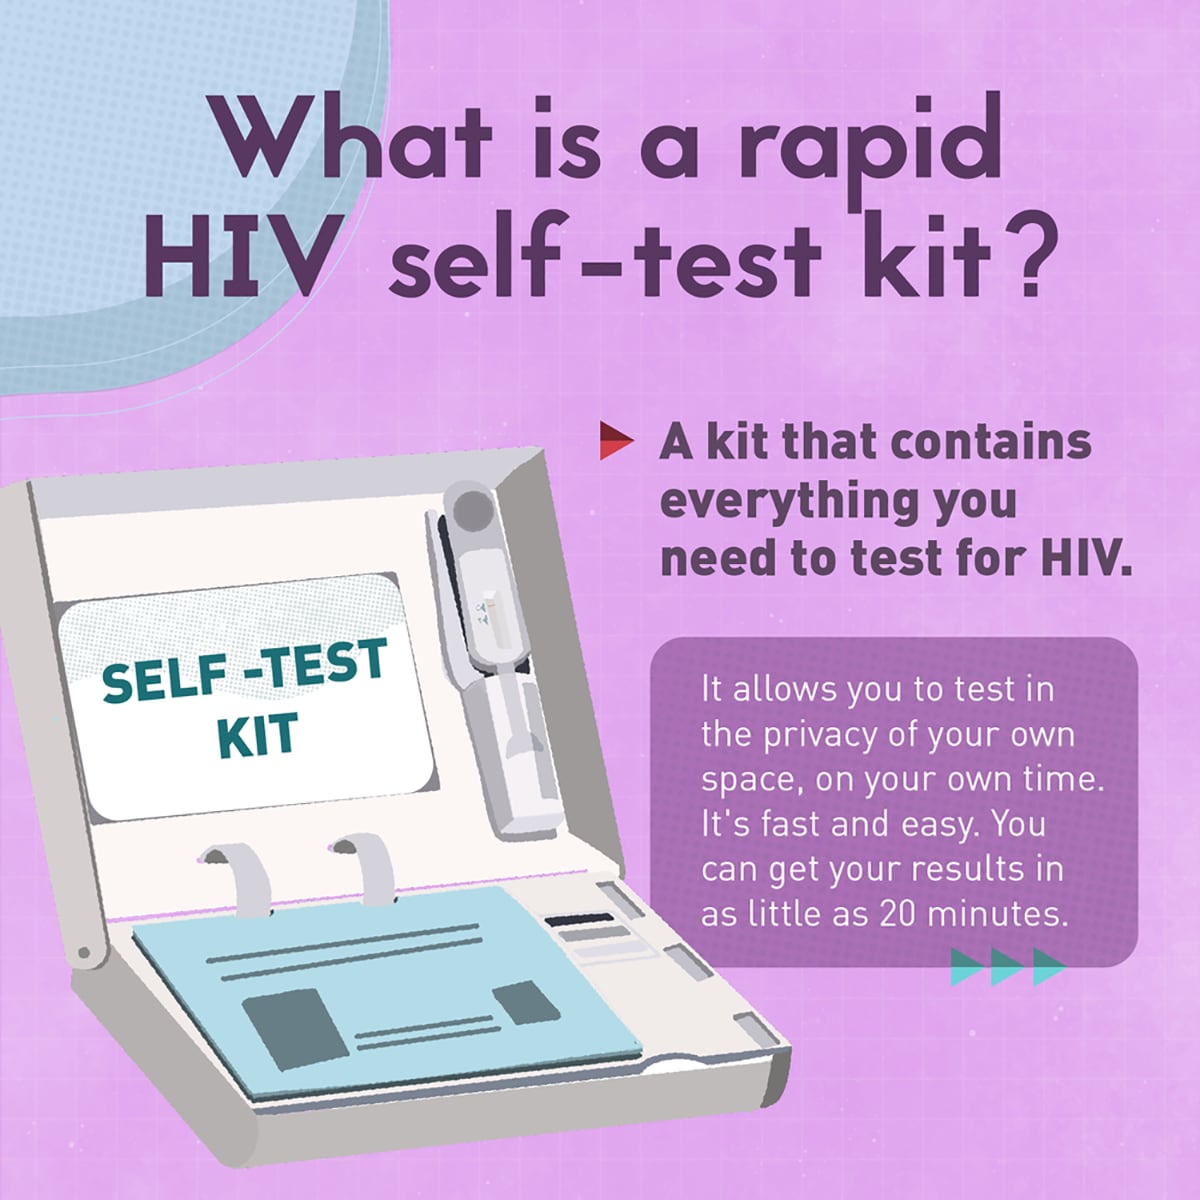 What is a rapid HIV self test kit?